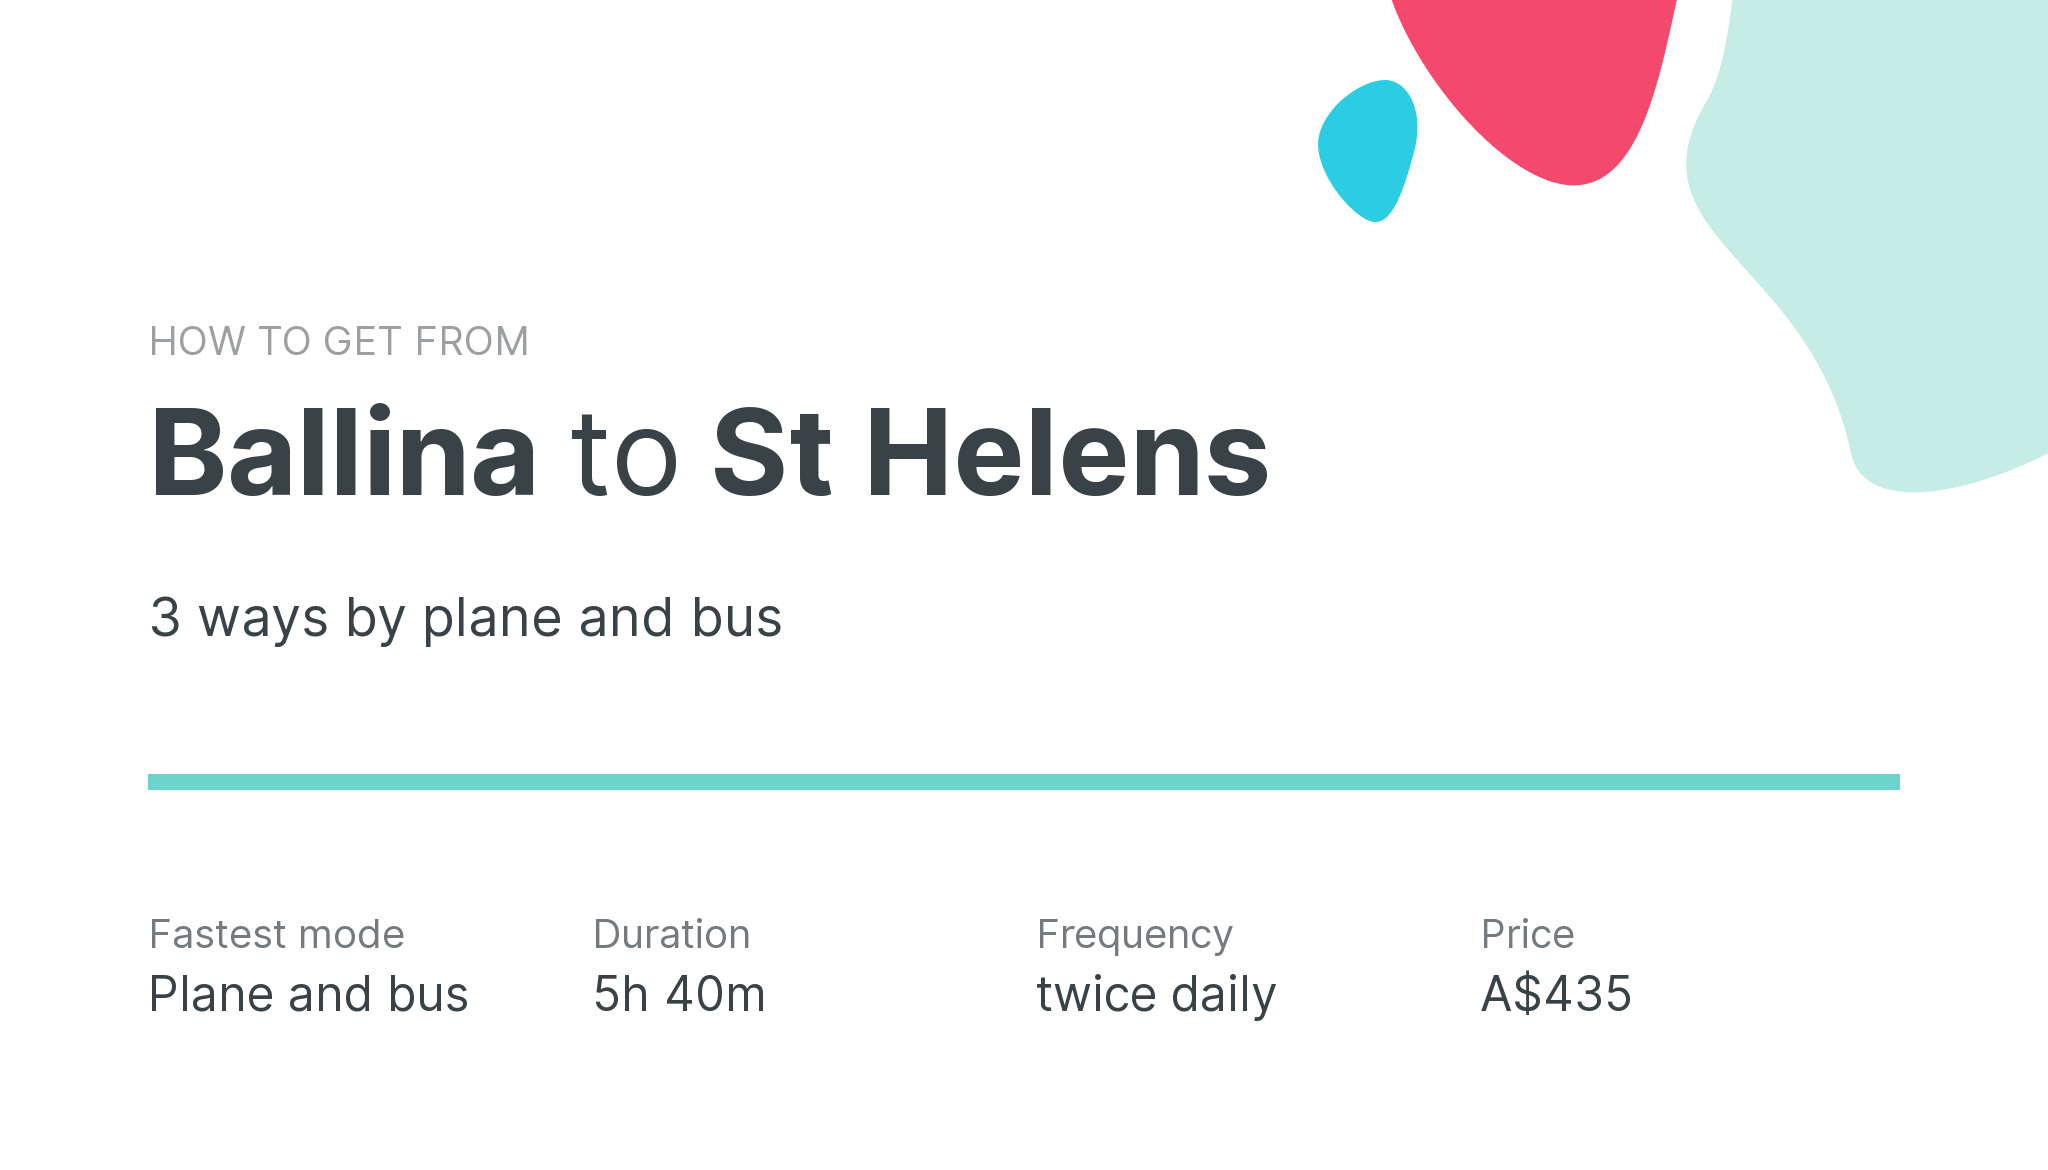 How do I get from Ballina to St Helens